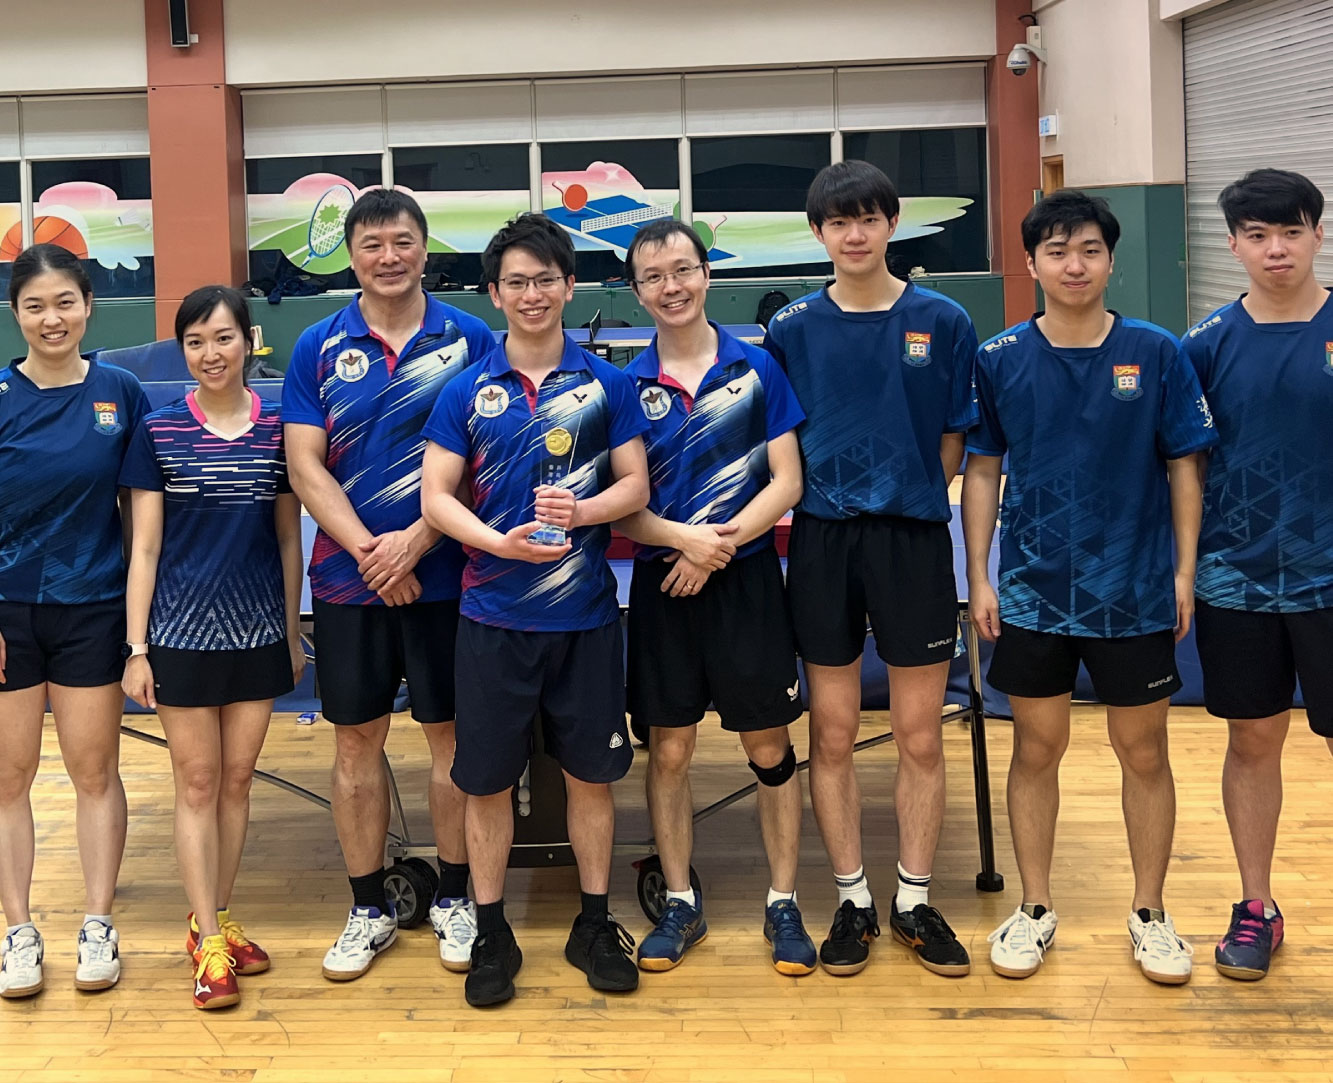 BDS Students Joined HKDA to Compete in Table Tennis Match